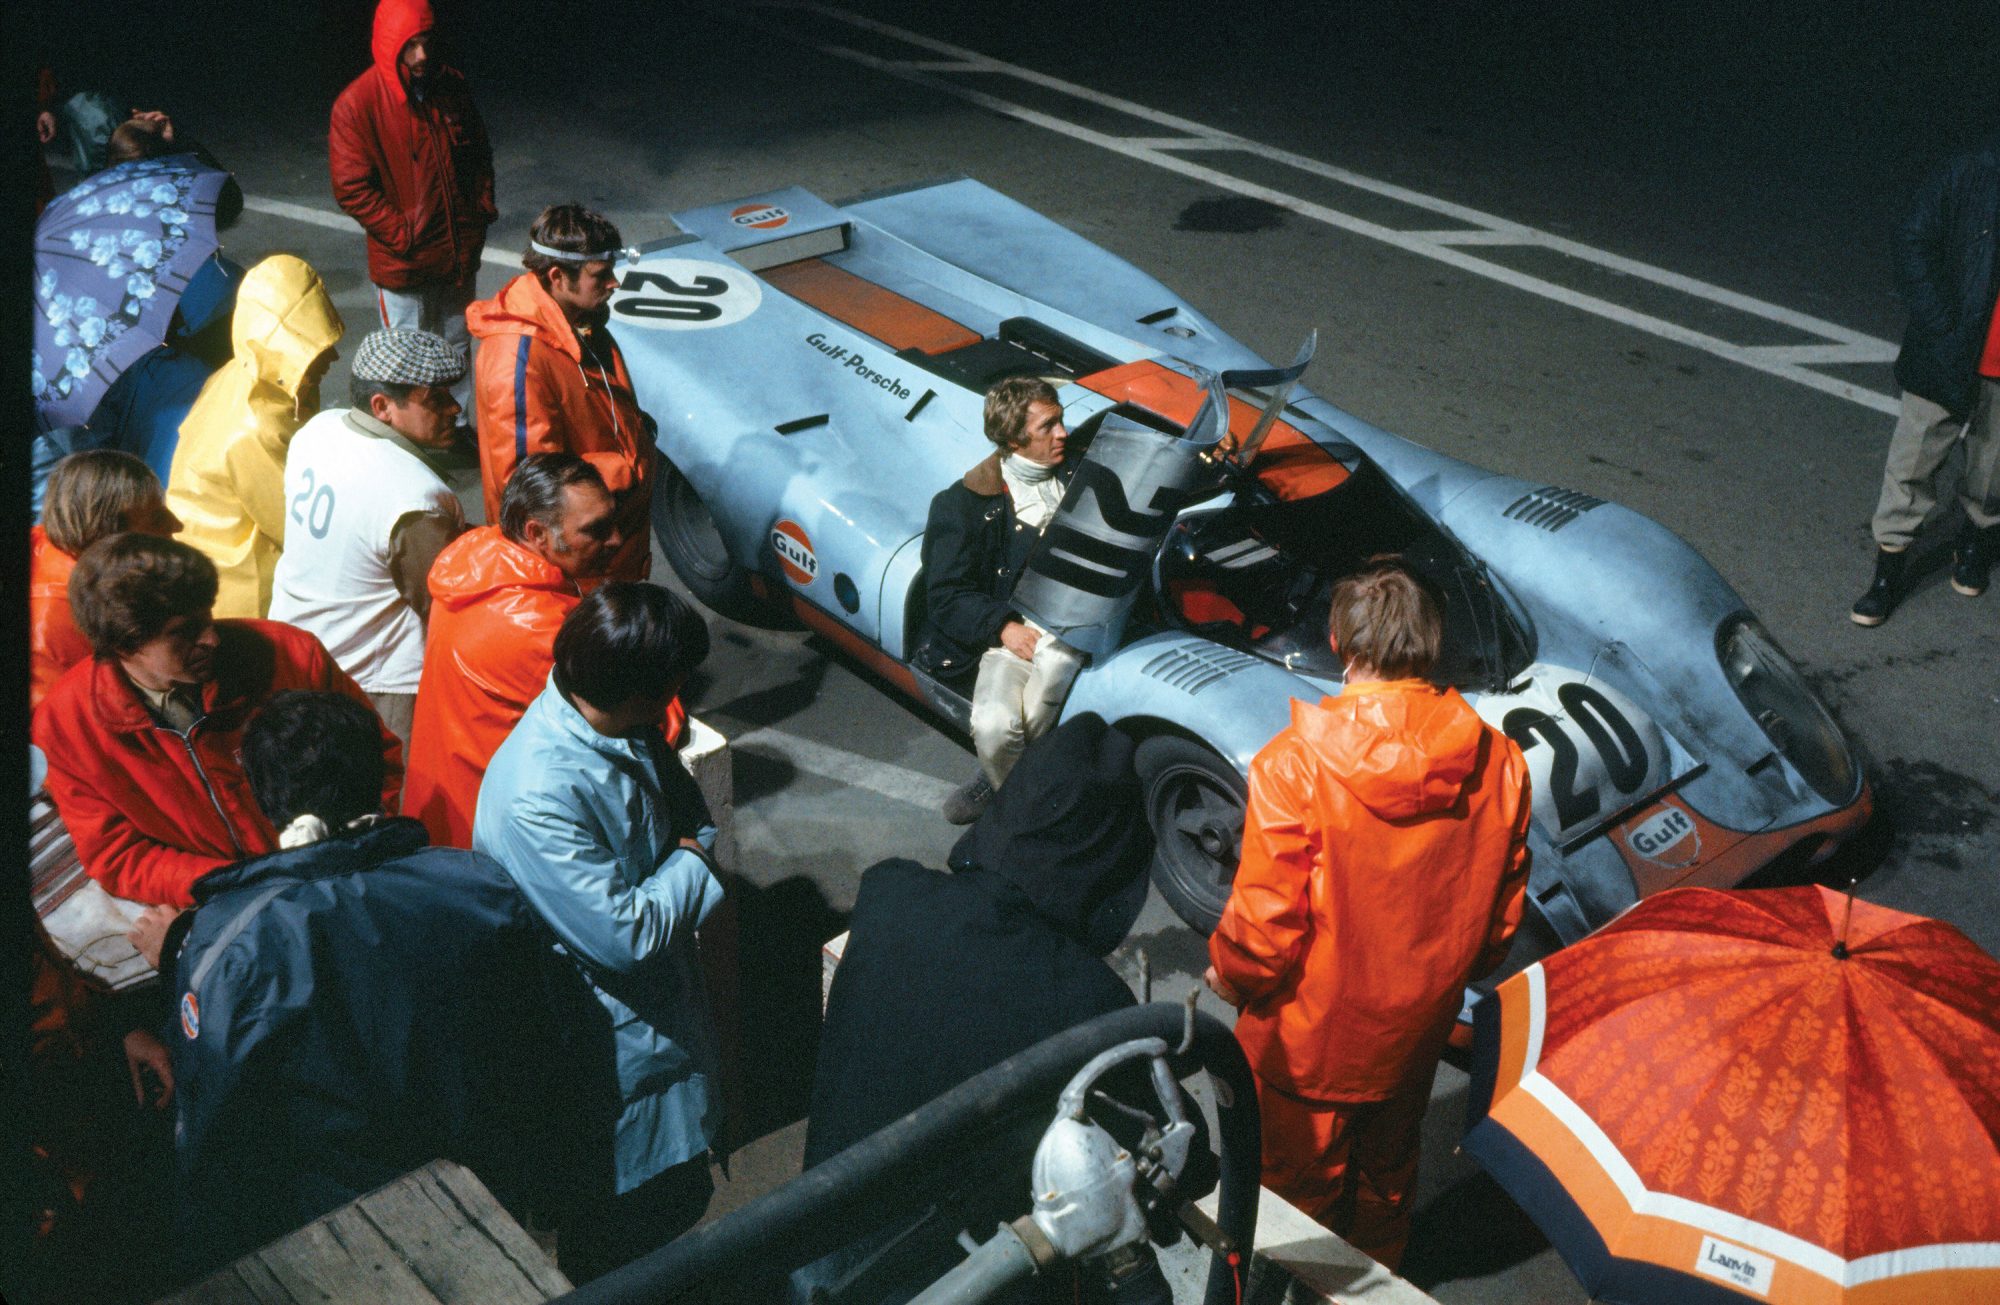 Steve McQueen sitting in a Porsche 917KH with number 20 Gulf Oil livery, surrounded by crew of the film